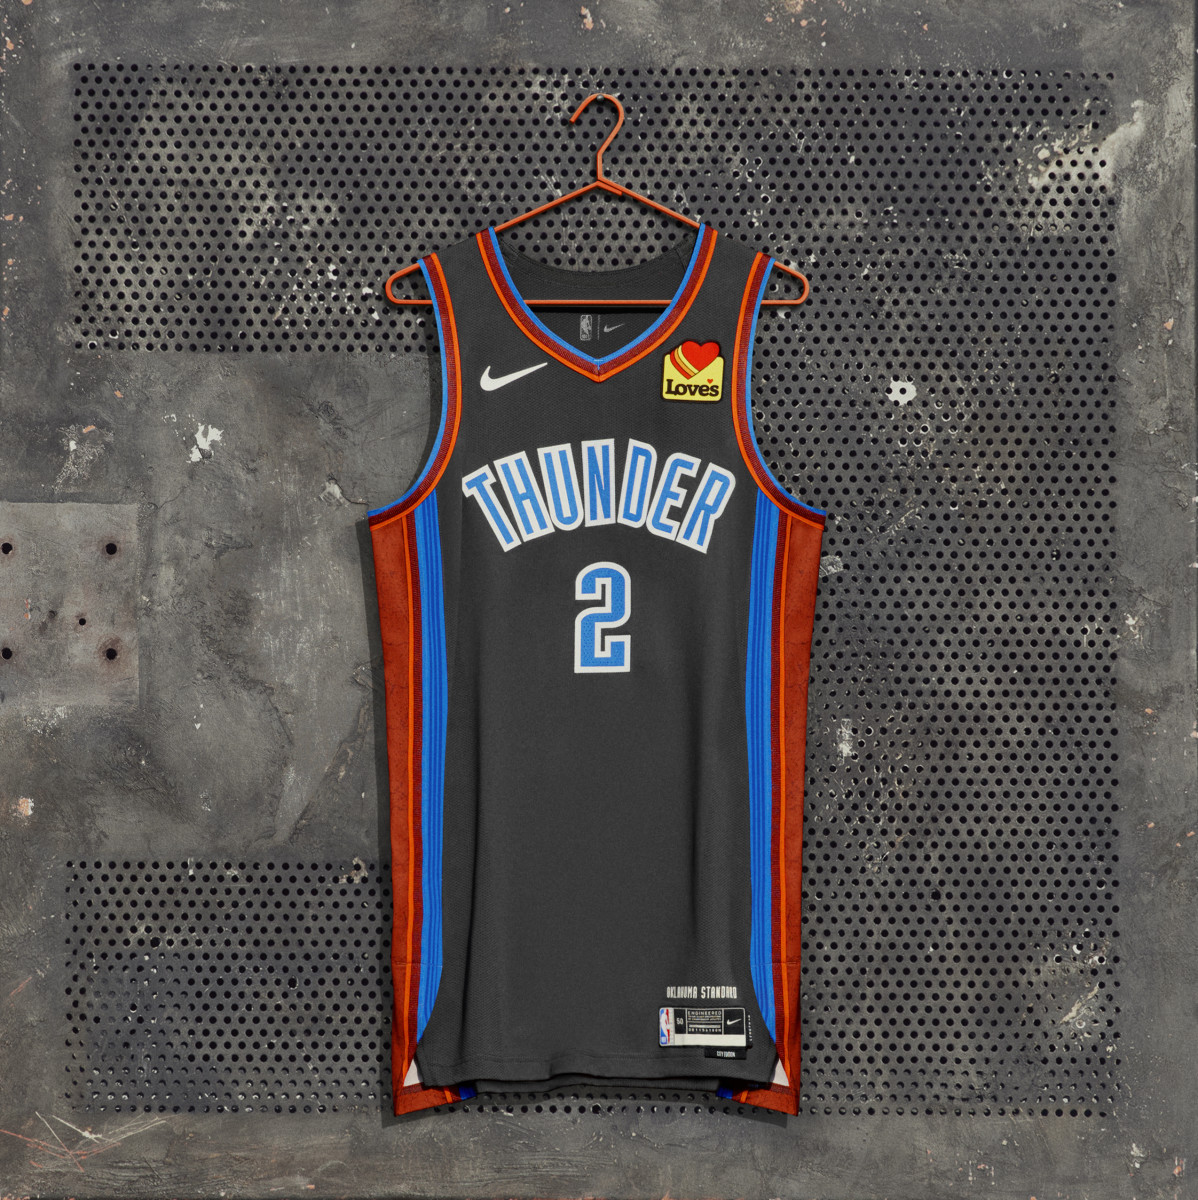 NBA City Edition jerseys for 2020-2021, ranked 